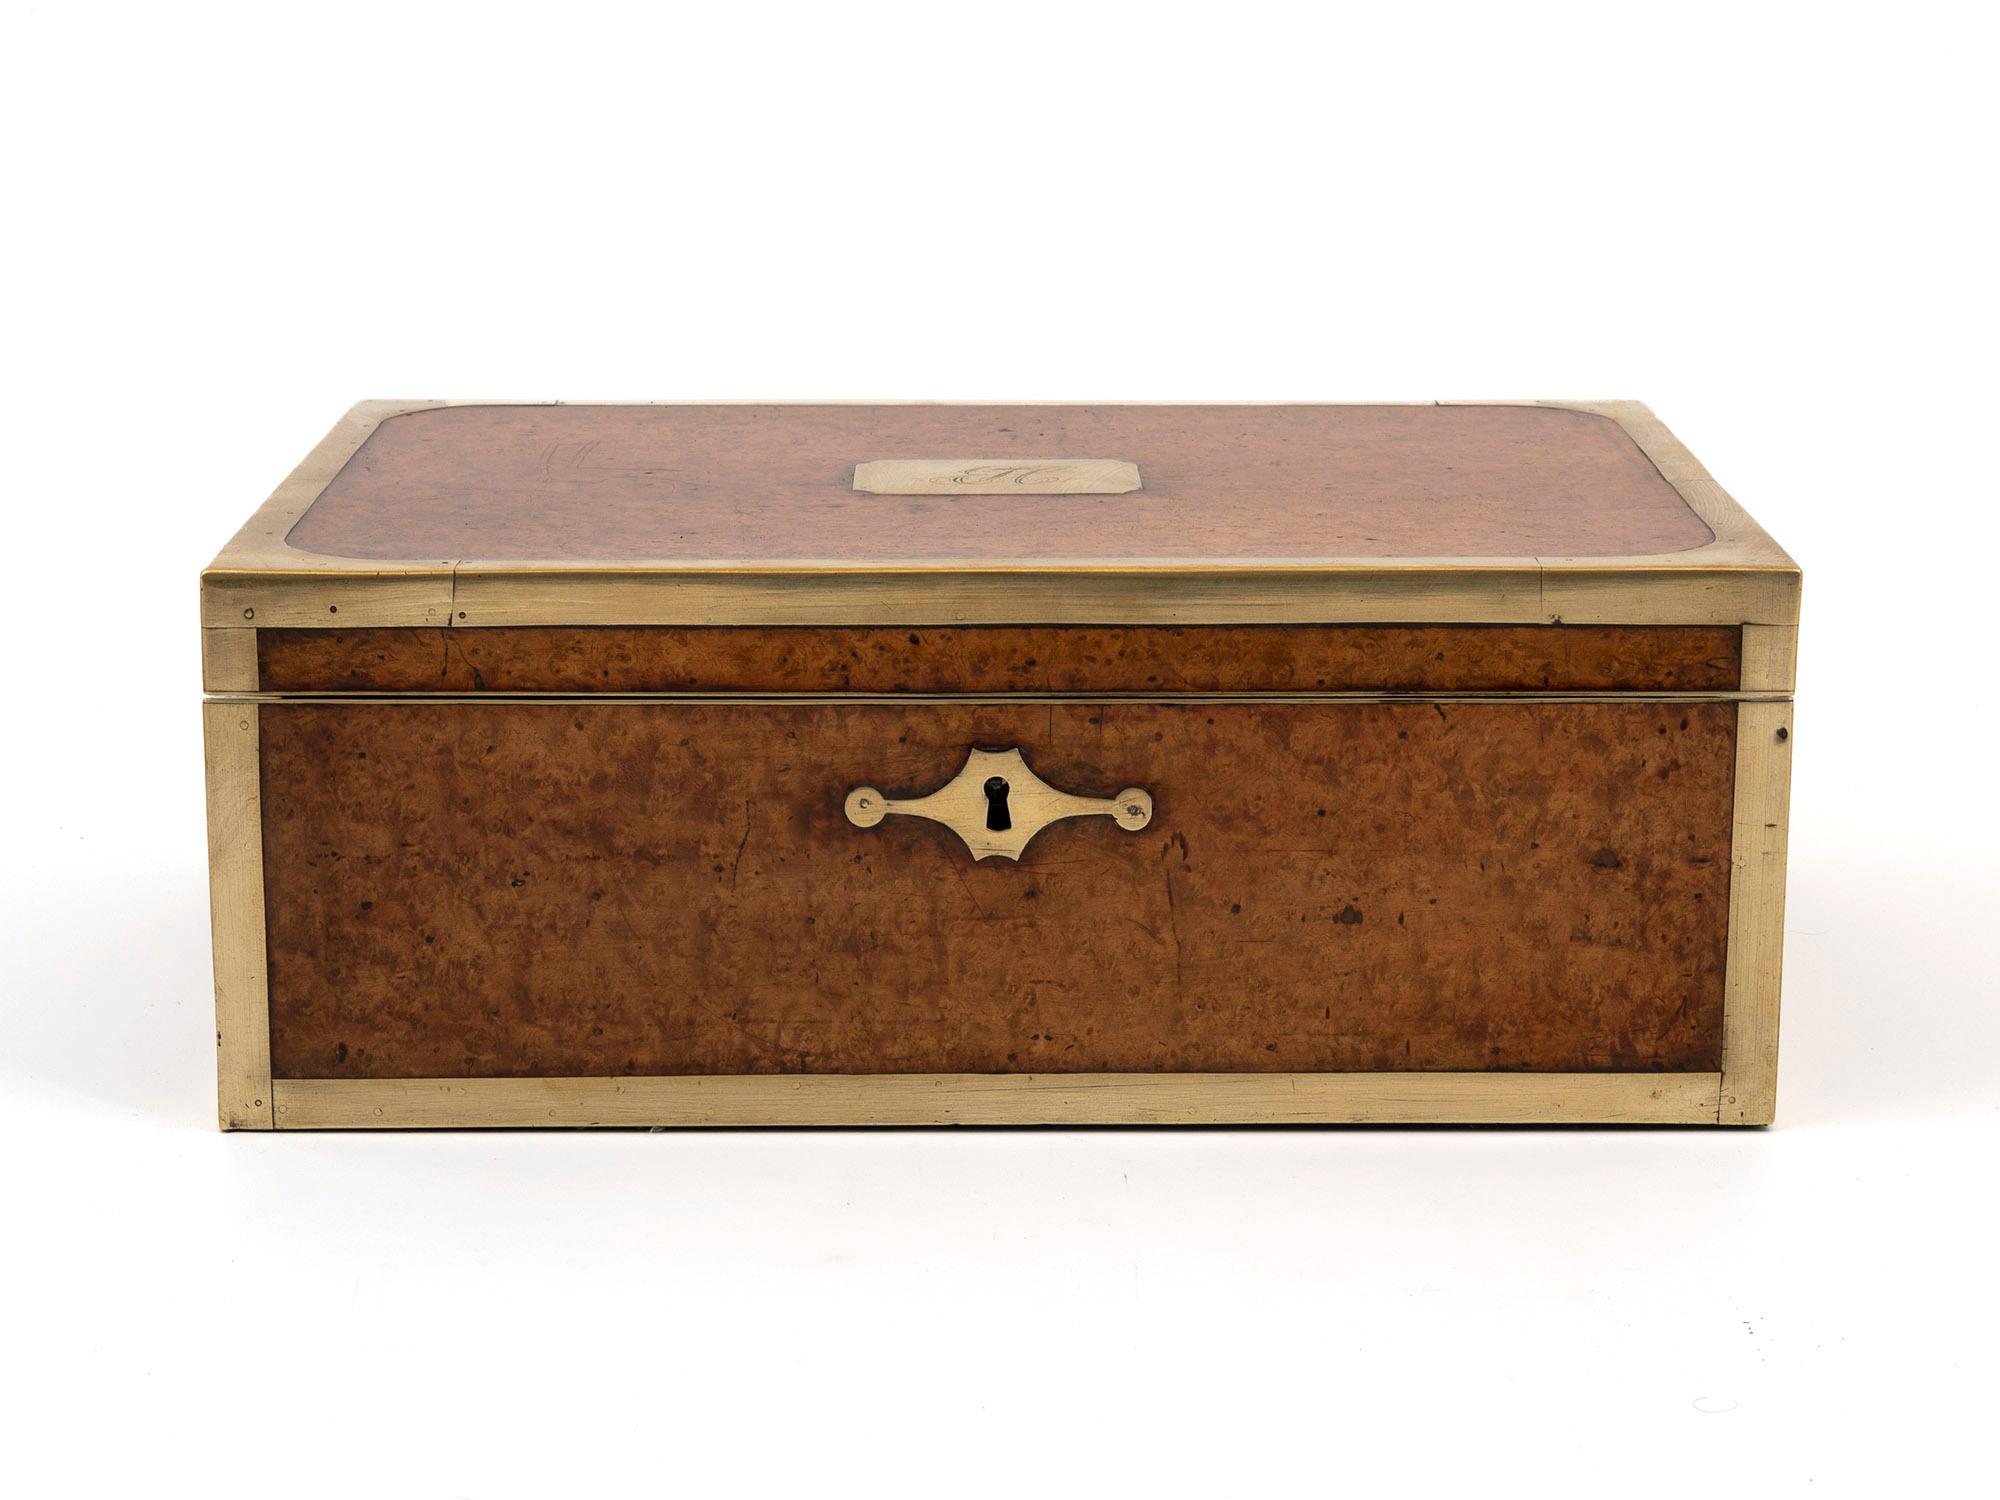 Brass Bounded

From our Writing Box collection, we are pleased to offer this Anglo Indian Amboyna Campaign Writing Box. The Writing Box of slim rectangular form made from Amboyna with thick brass banding around the perimeter. The box with a brass